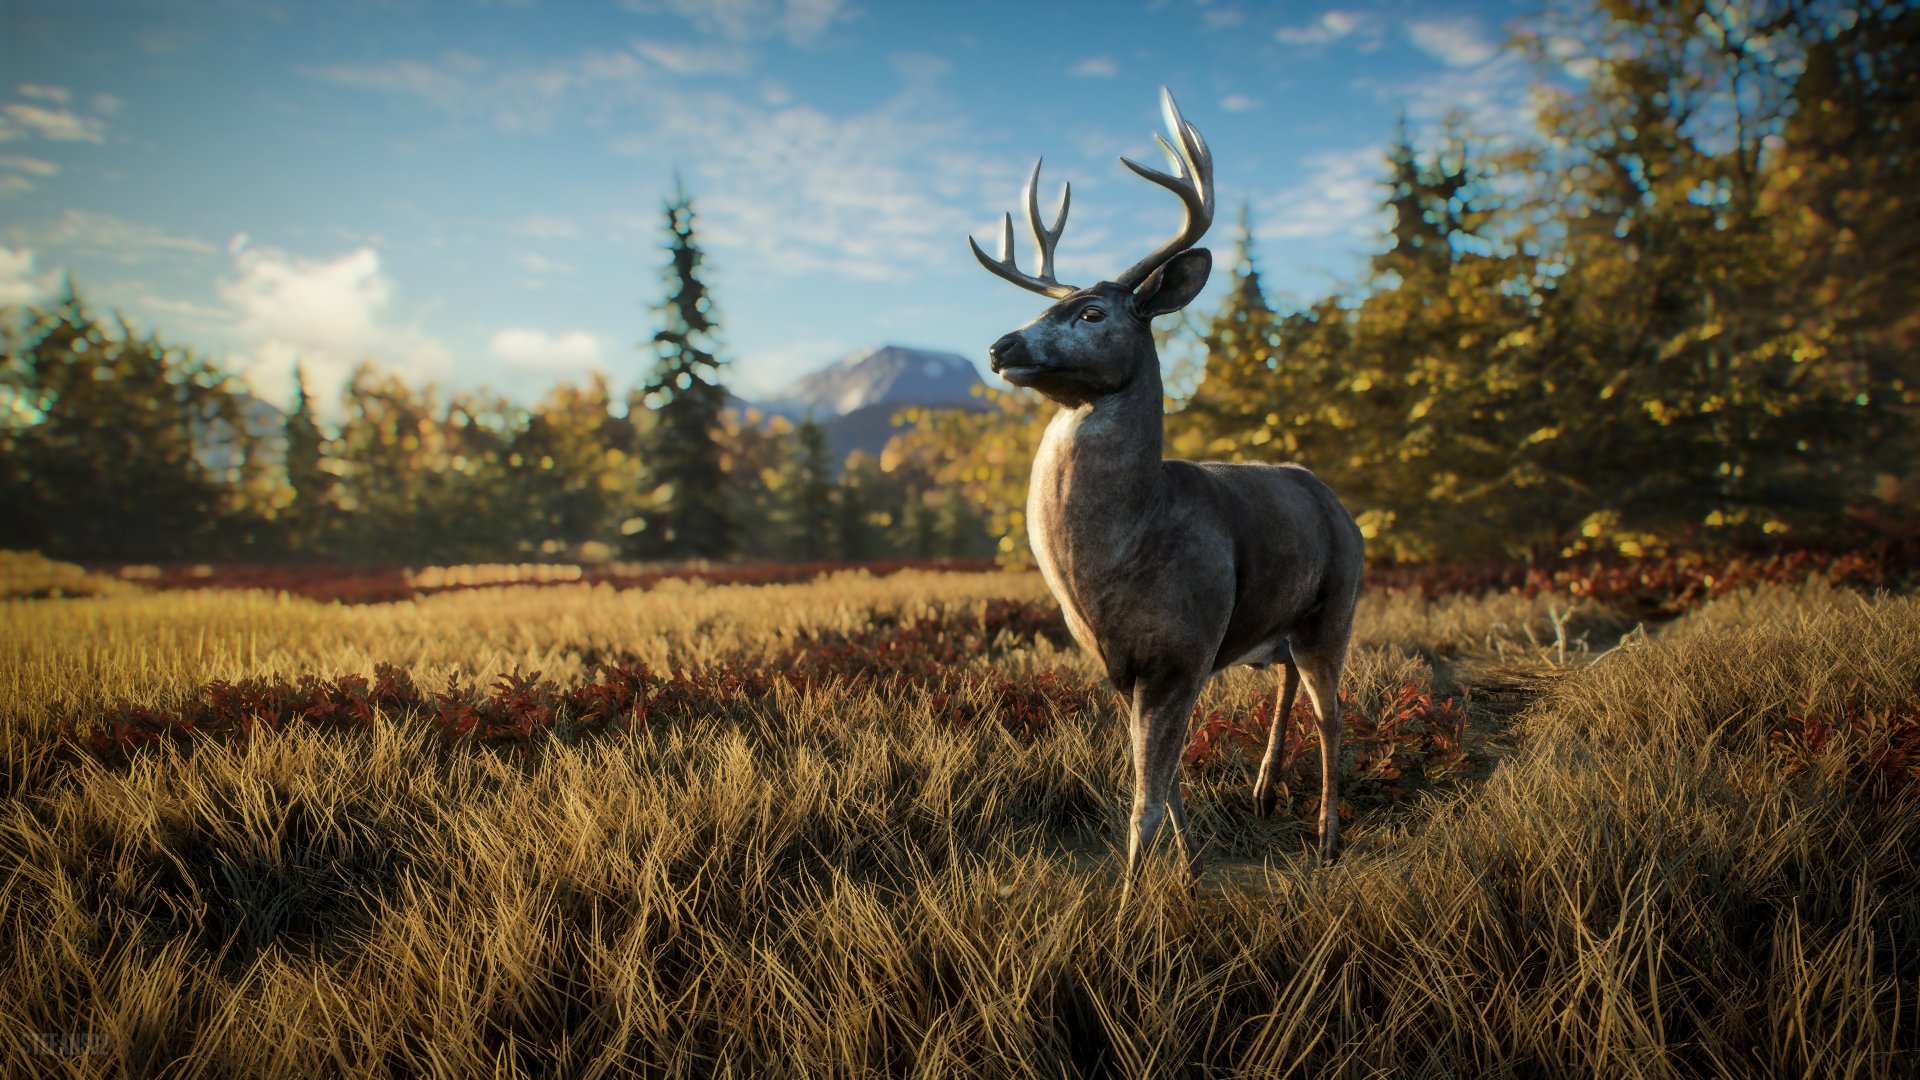 TheHunter: Call of the Wild / David the Deer is Curious by StefanS02